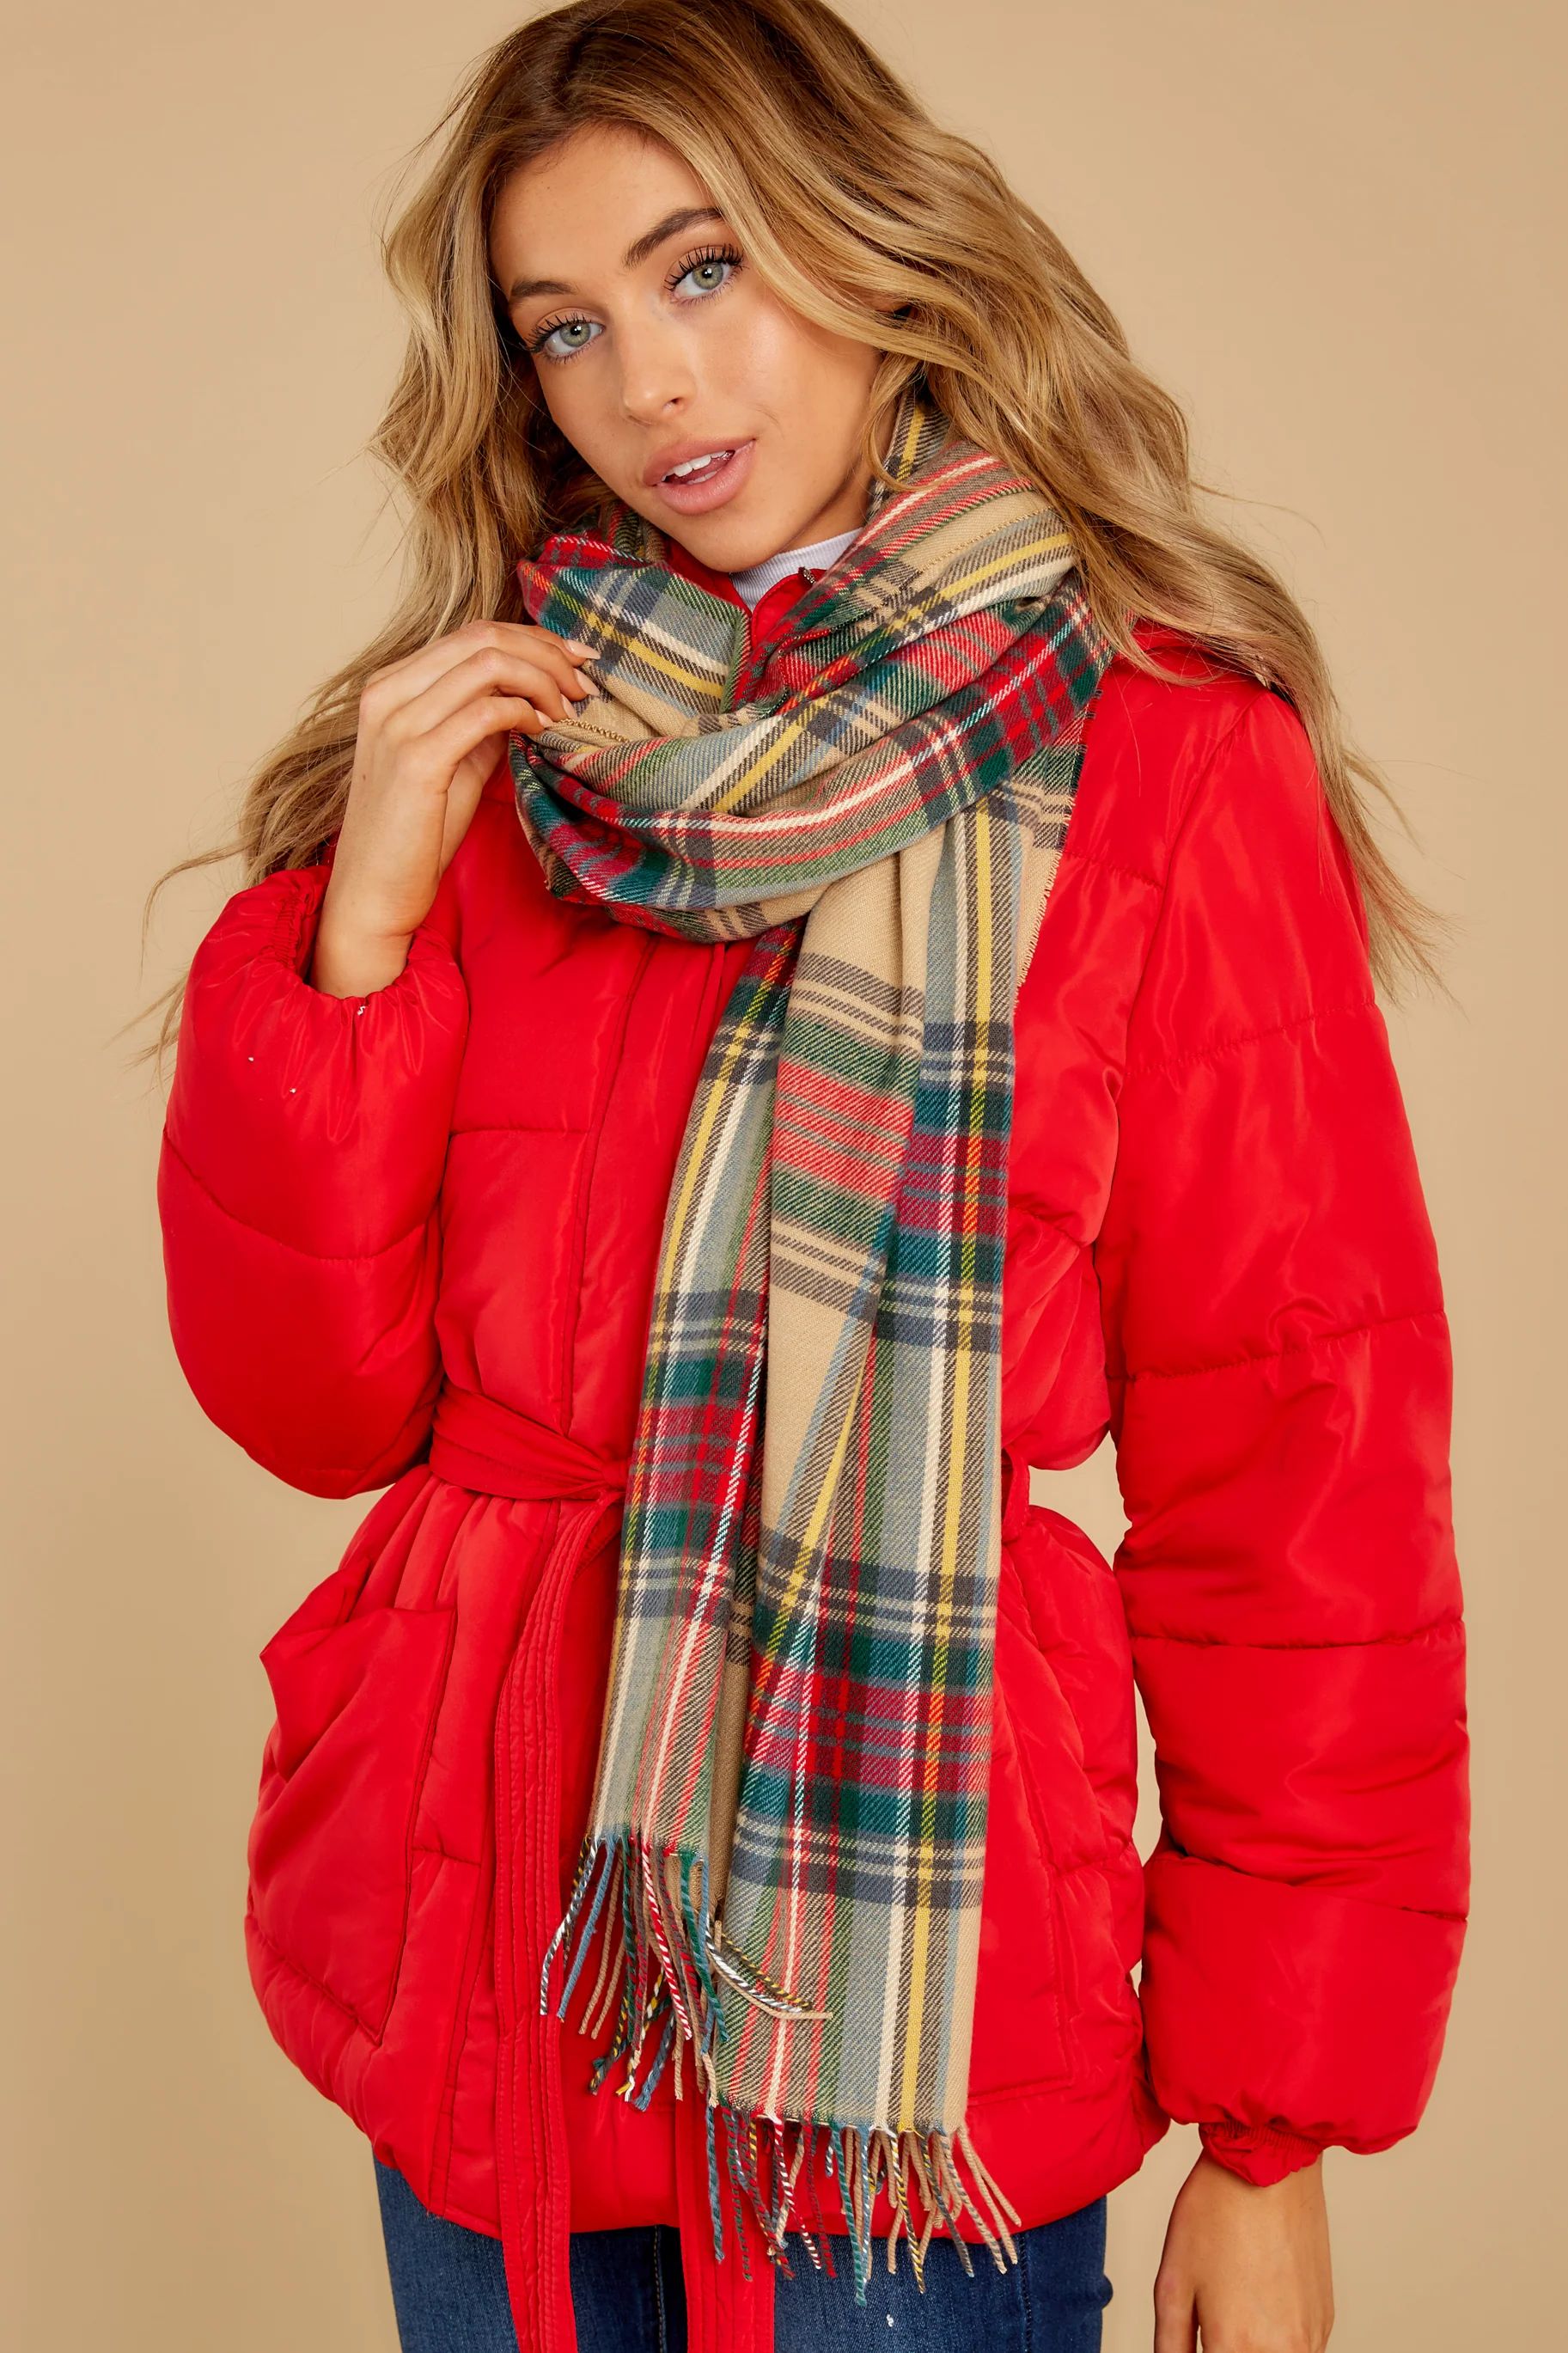 My Favorite Tradition Tan Plaid Scarf | Red Dress 